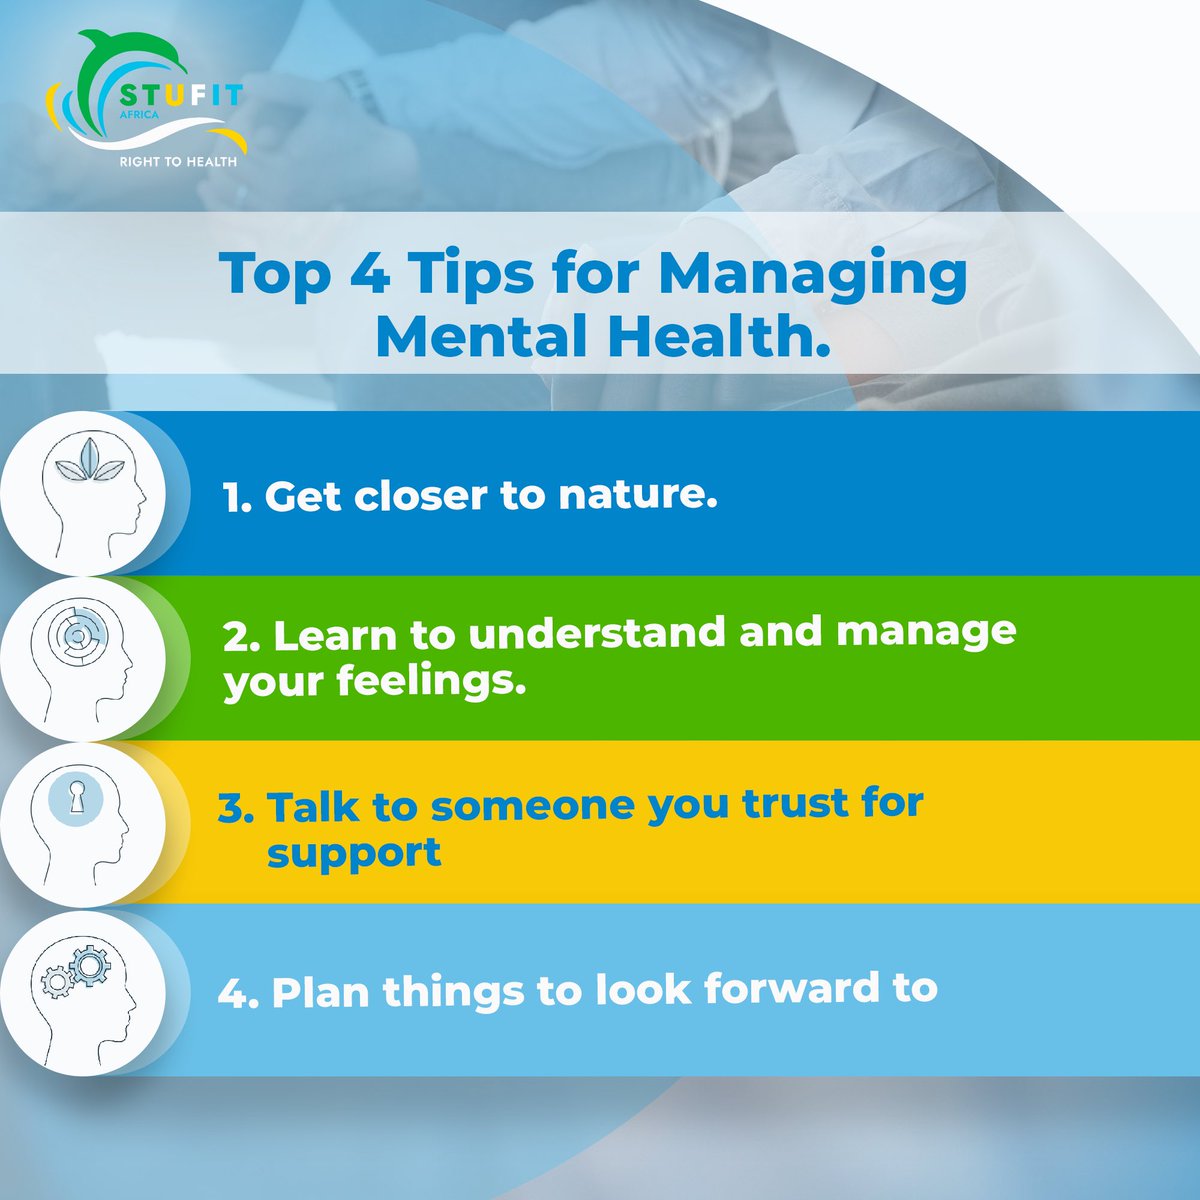 Empower Your Mental Health with These Top 4 Tips

.
.
.
.

:#StufitAfrica #HealthyKids #FitKids #ChildHealth #WellnessForChildren #ActiveLifestyle #FitnessGoals #ChildhoodHealth #HealthAndFitness #YouthWellness #HealthyHabits #HealthyFuture #EmpoweringKids #HealthyLiving